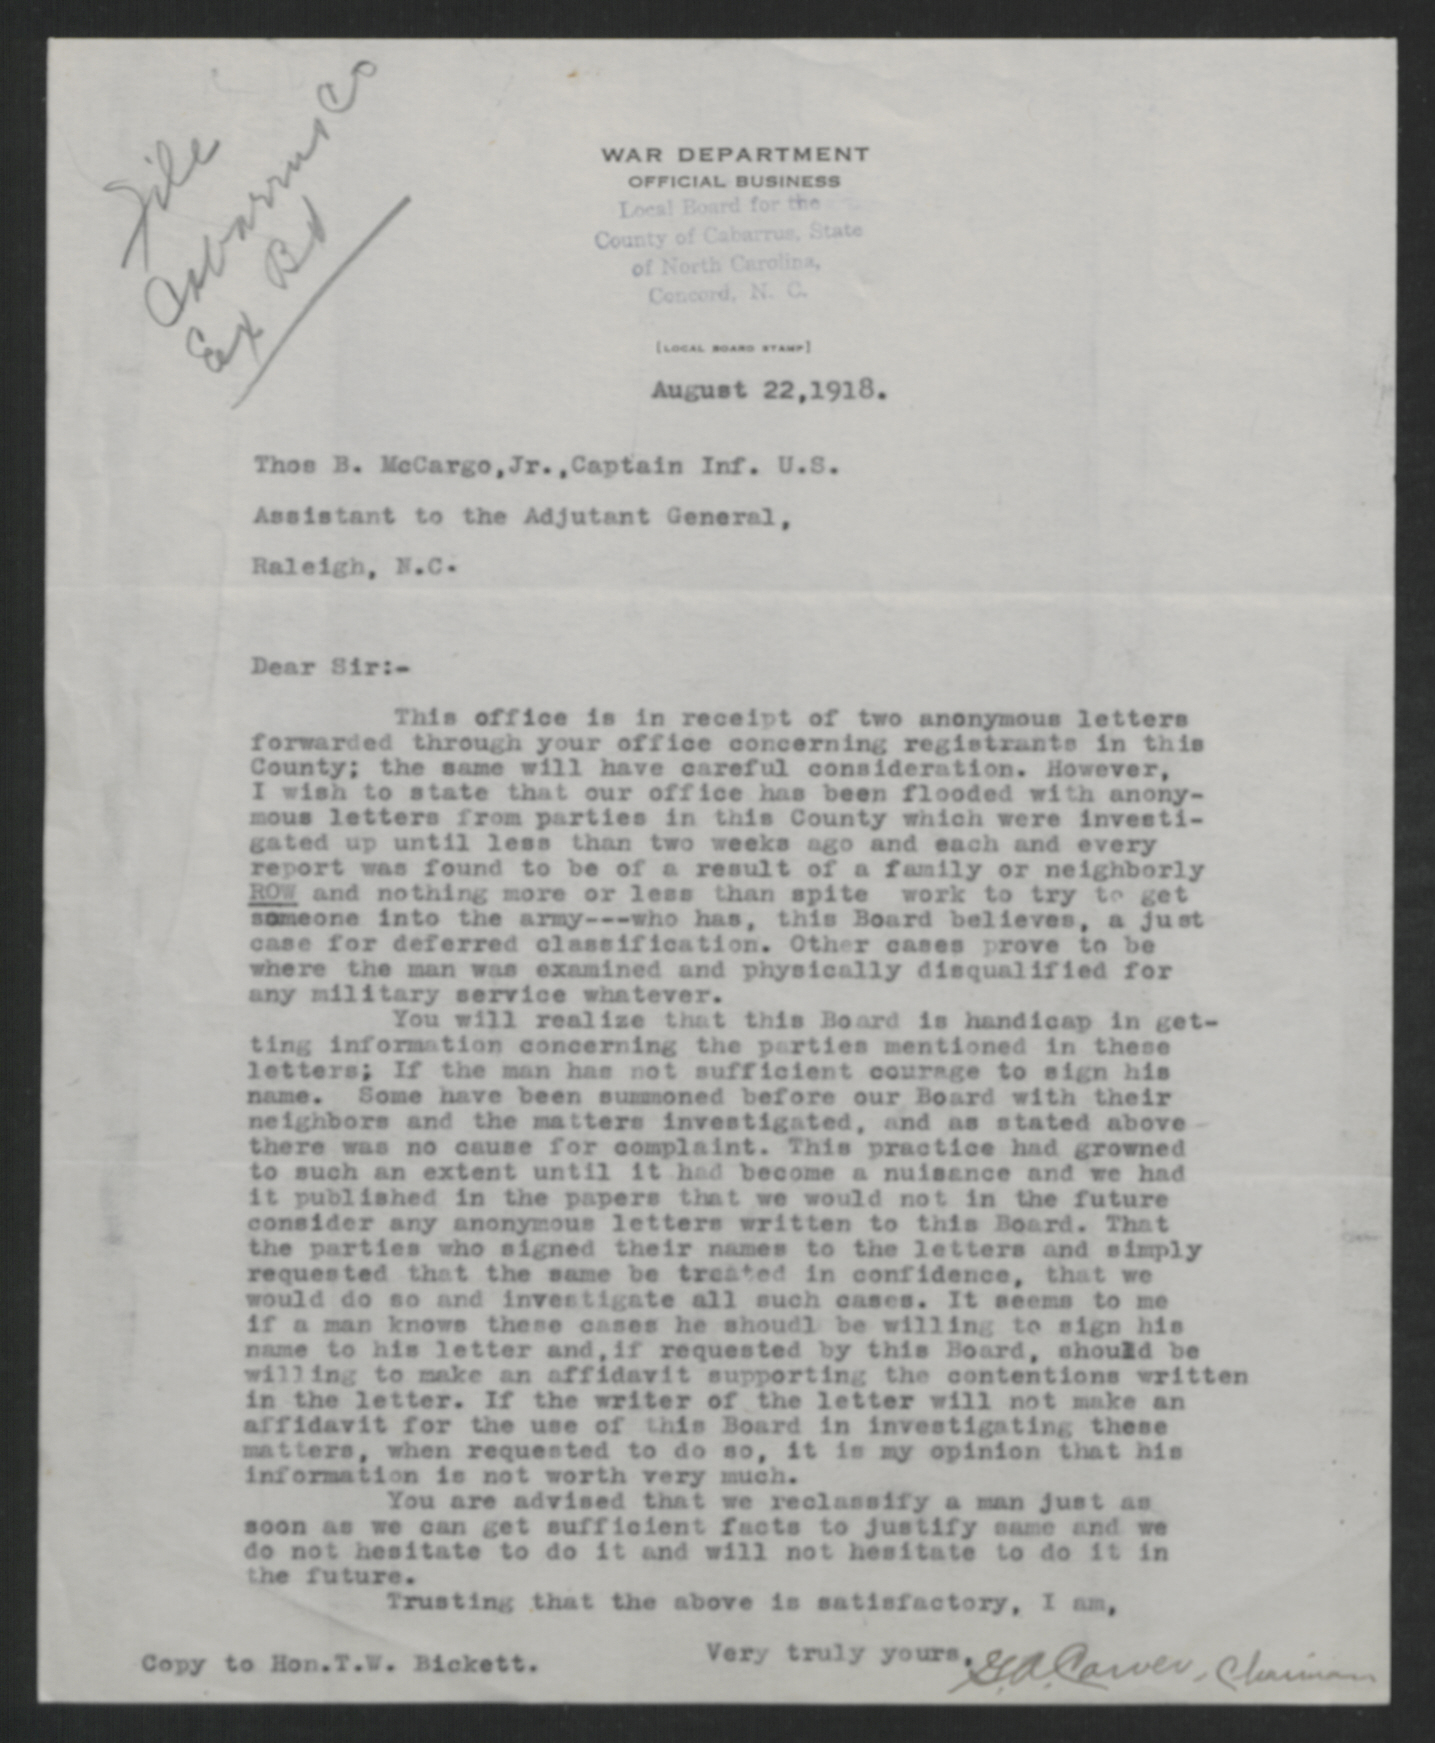 Letter from Gordon A. Carver to Thomas B. McCargo, Jr., August 22, 1918